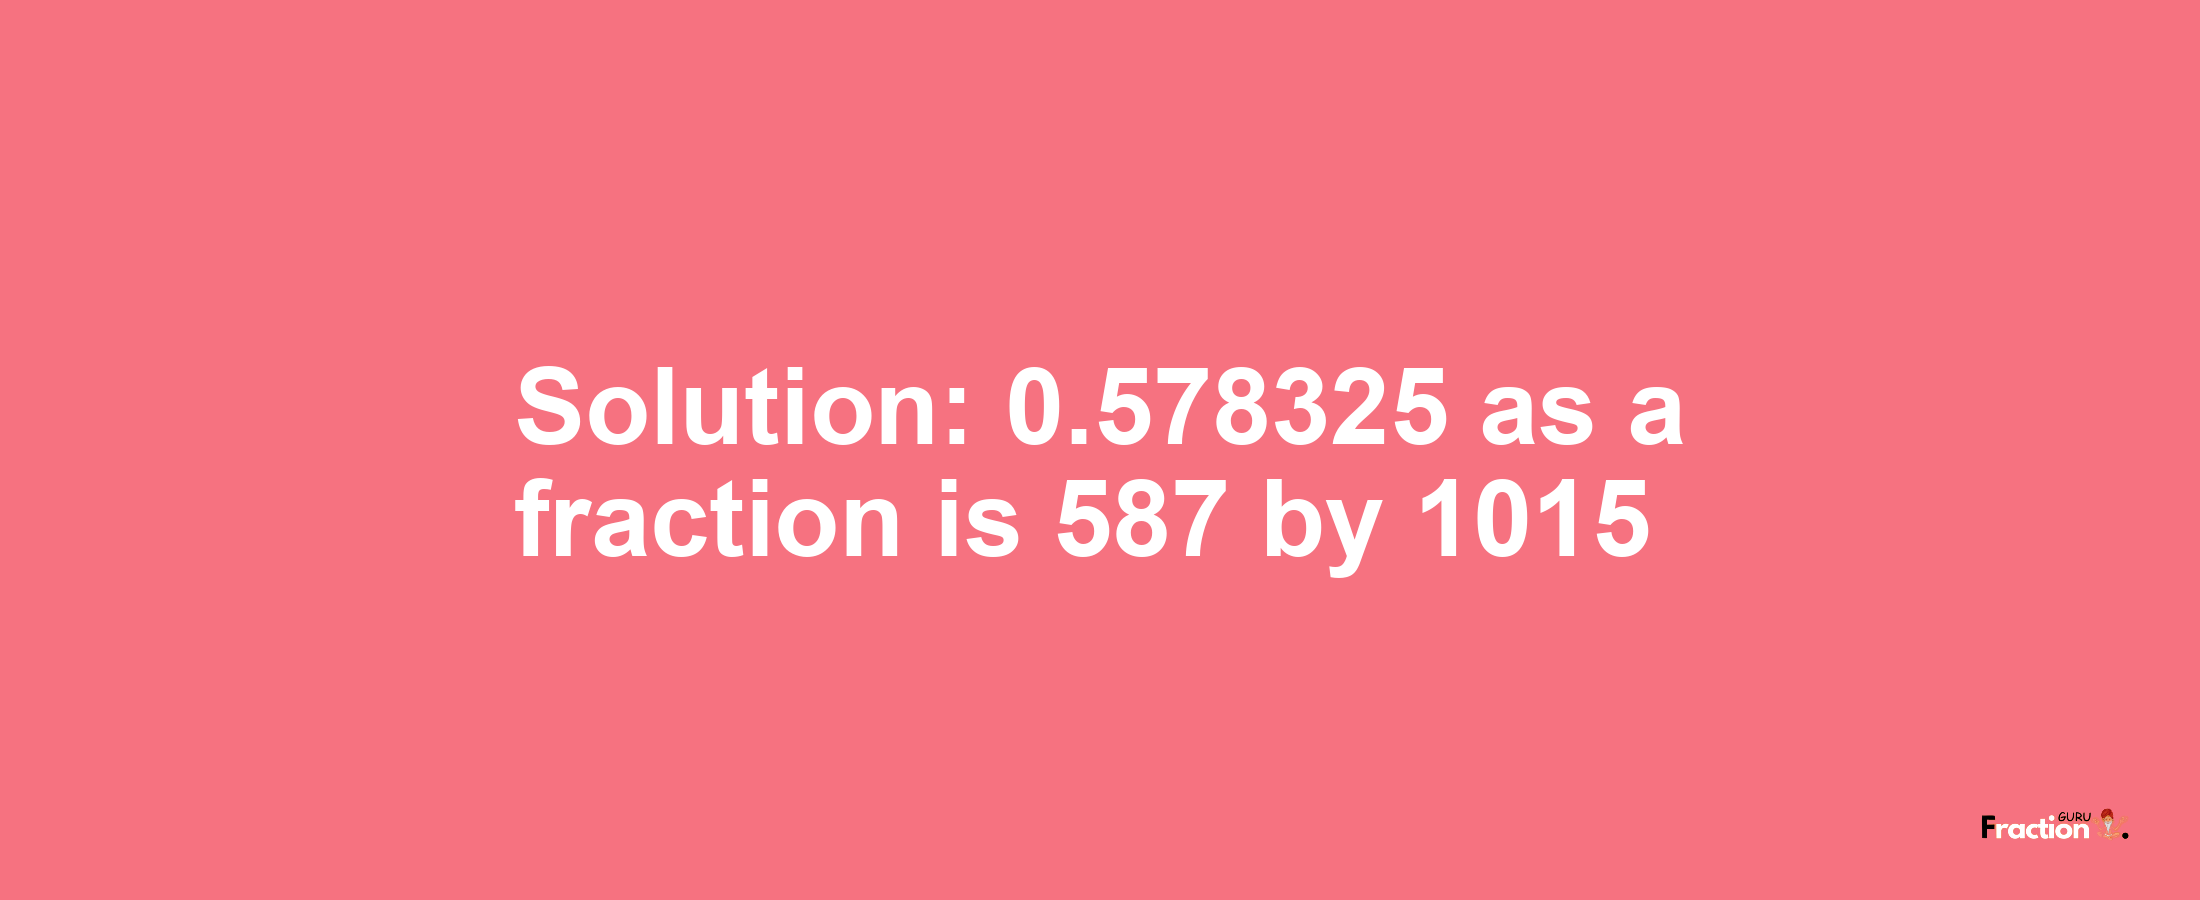 Solution:0.578325 as a fraction is 587/1015